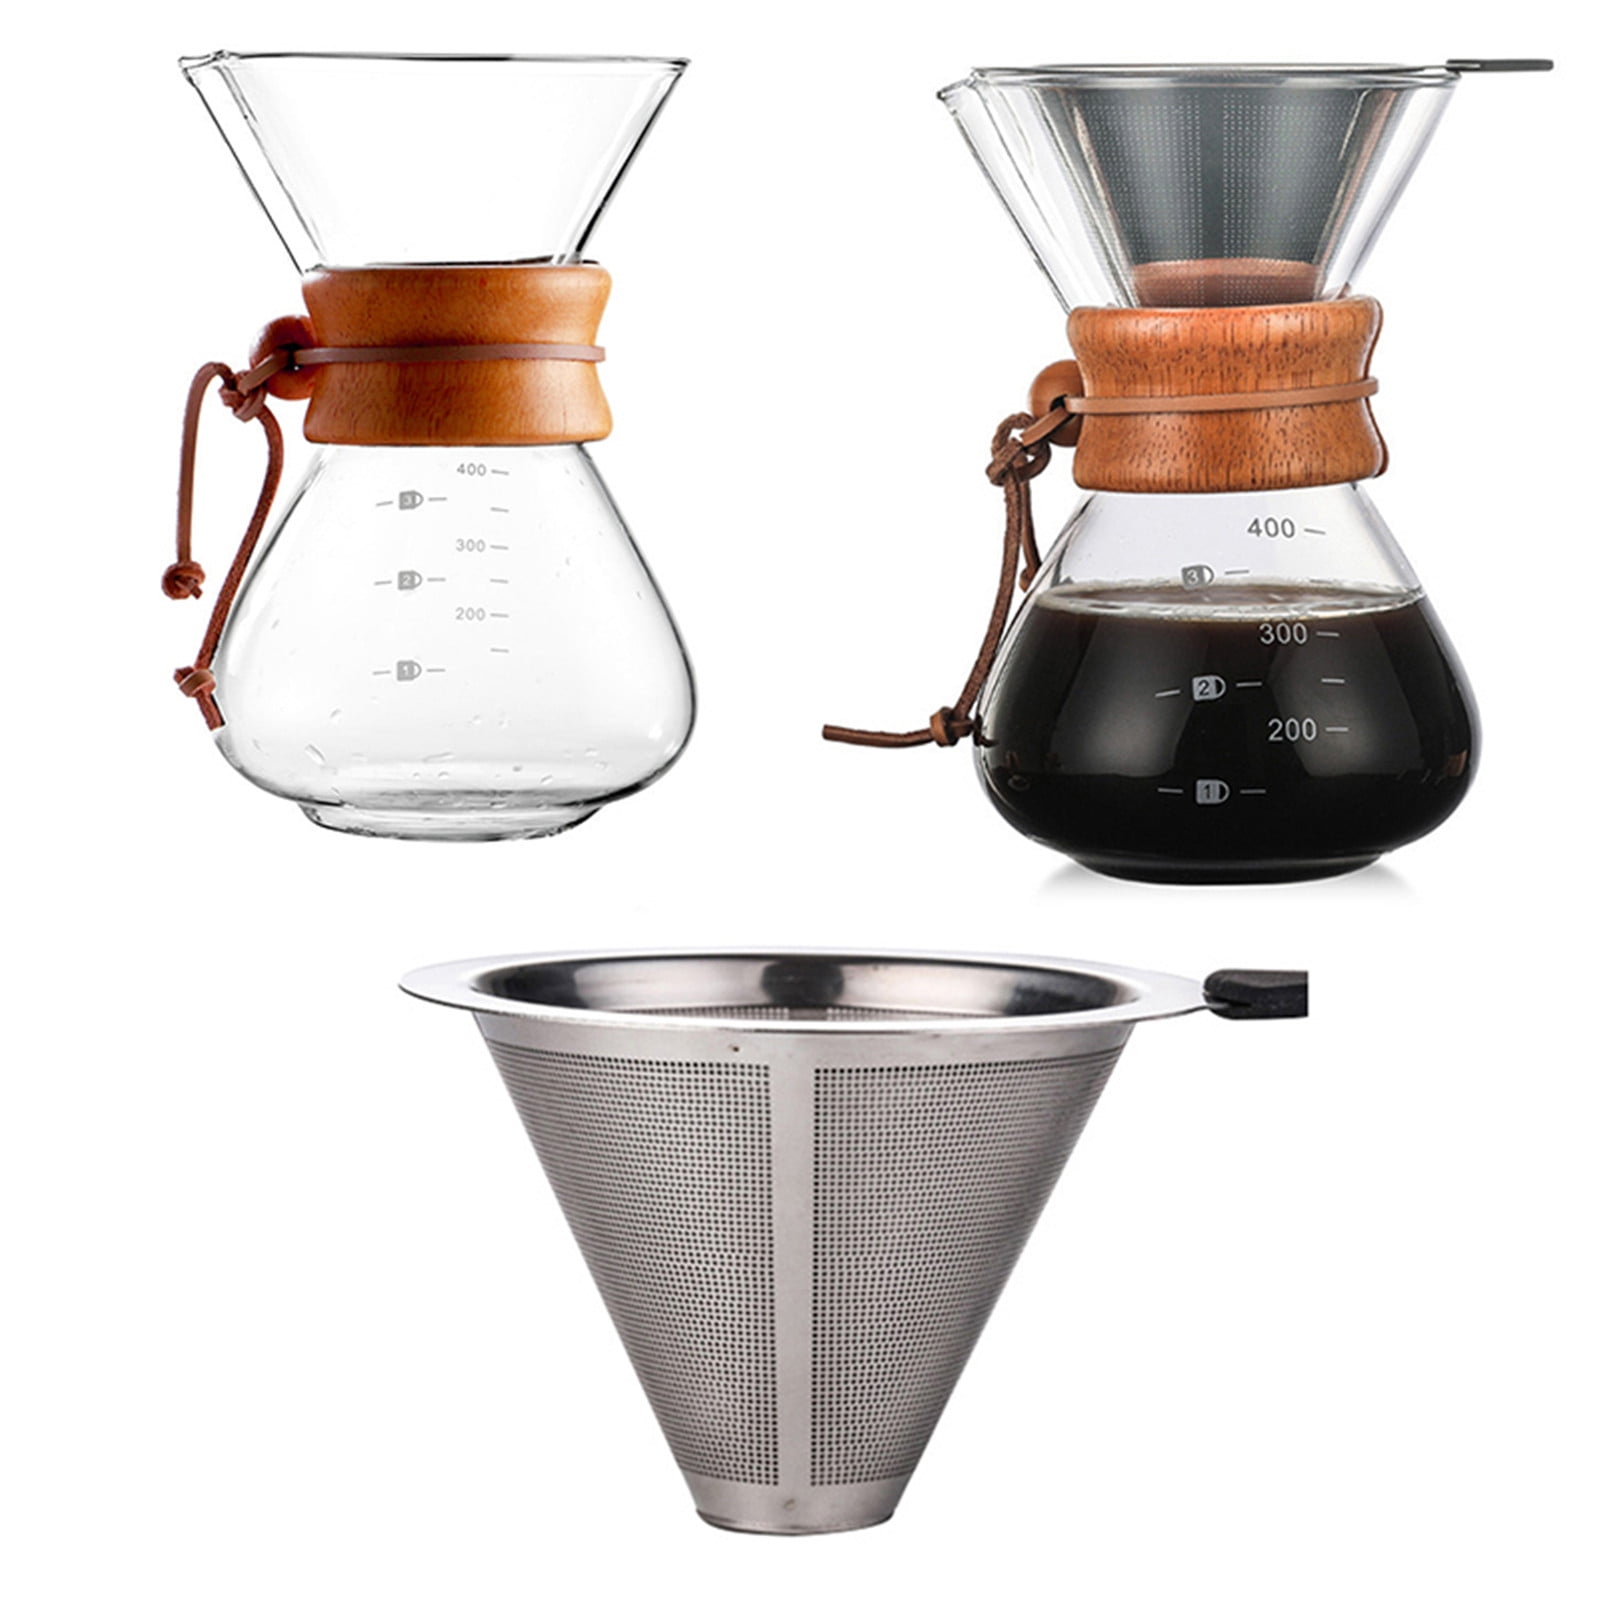 Pour Over Coffee Maker with Stainless Steel Filter, Borosilicate Glass Carafe Manual Coffee Dripper Brewer with Handle, No Paper Filters Needed Hand